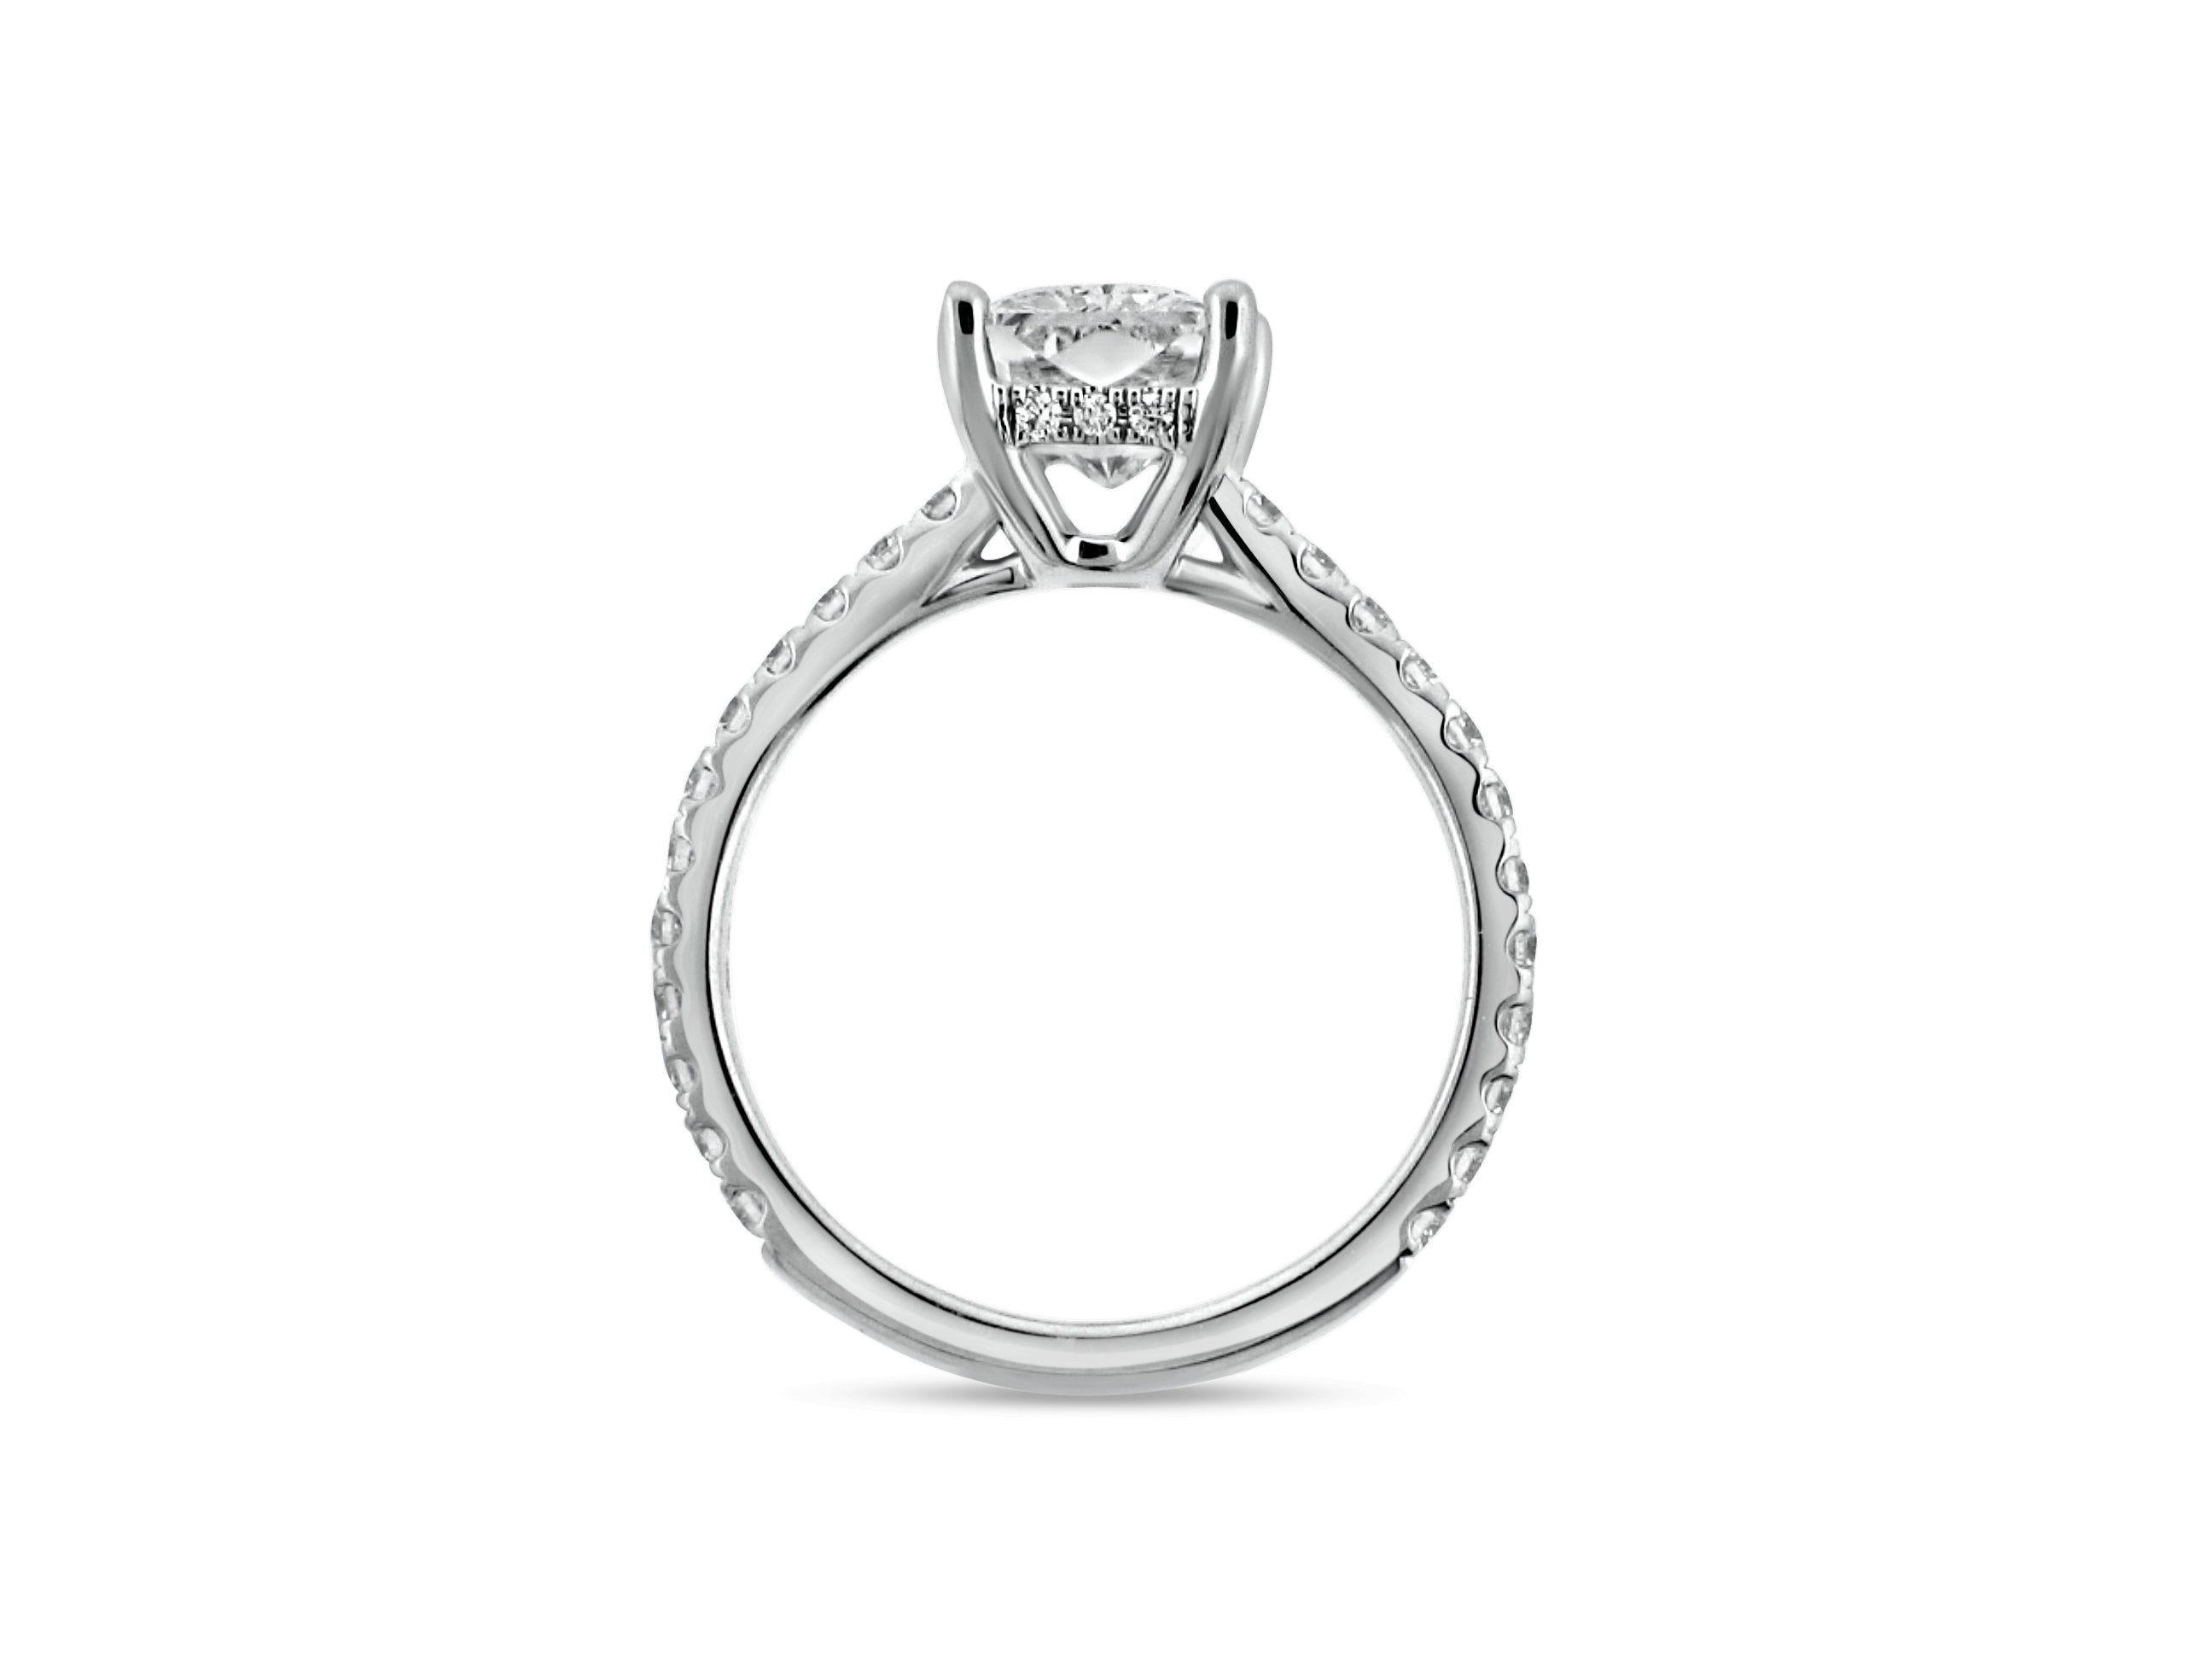 PRIVE' 18K WHITE GOLD 2.51CT RADIANT CUT LAB GROWN DIAMOND BY SWAROVSKI SI1 CLARITY AND F COLOR RADIANT. .50CT SI - G ACCENT NATURAL DIAMONDS